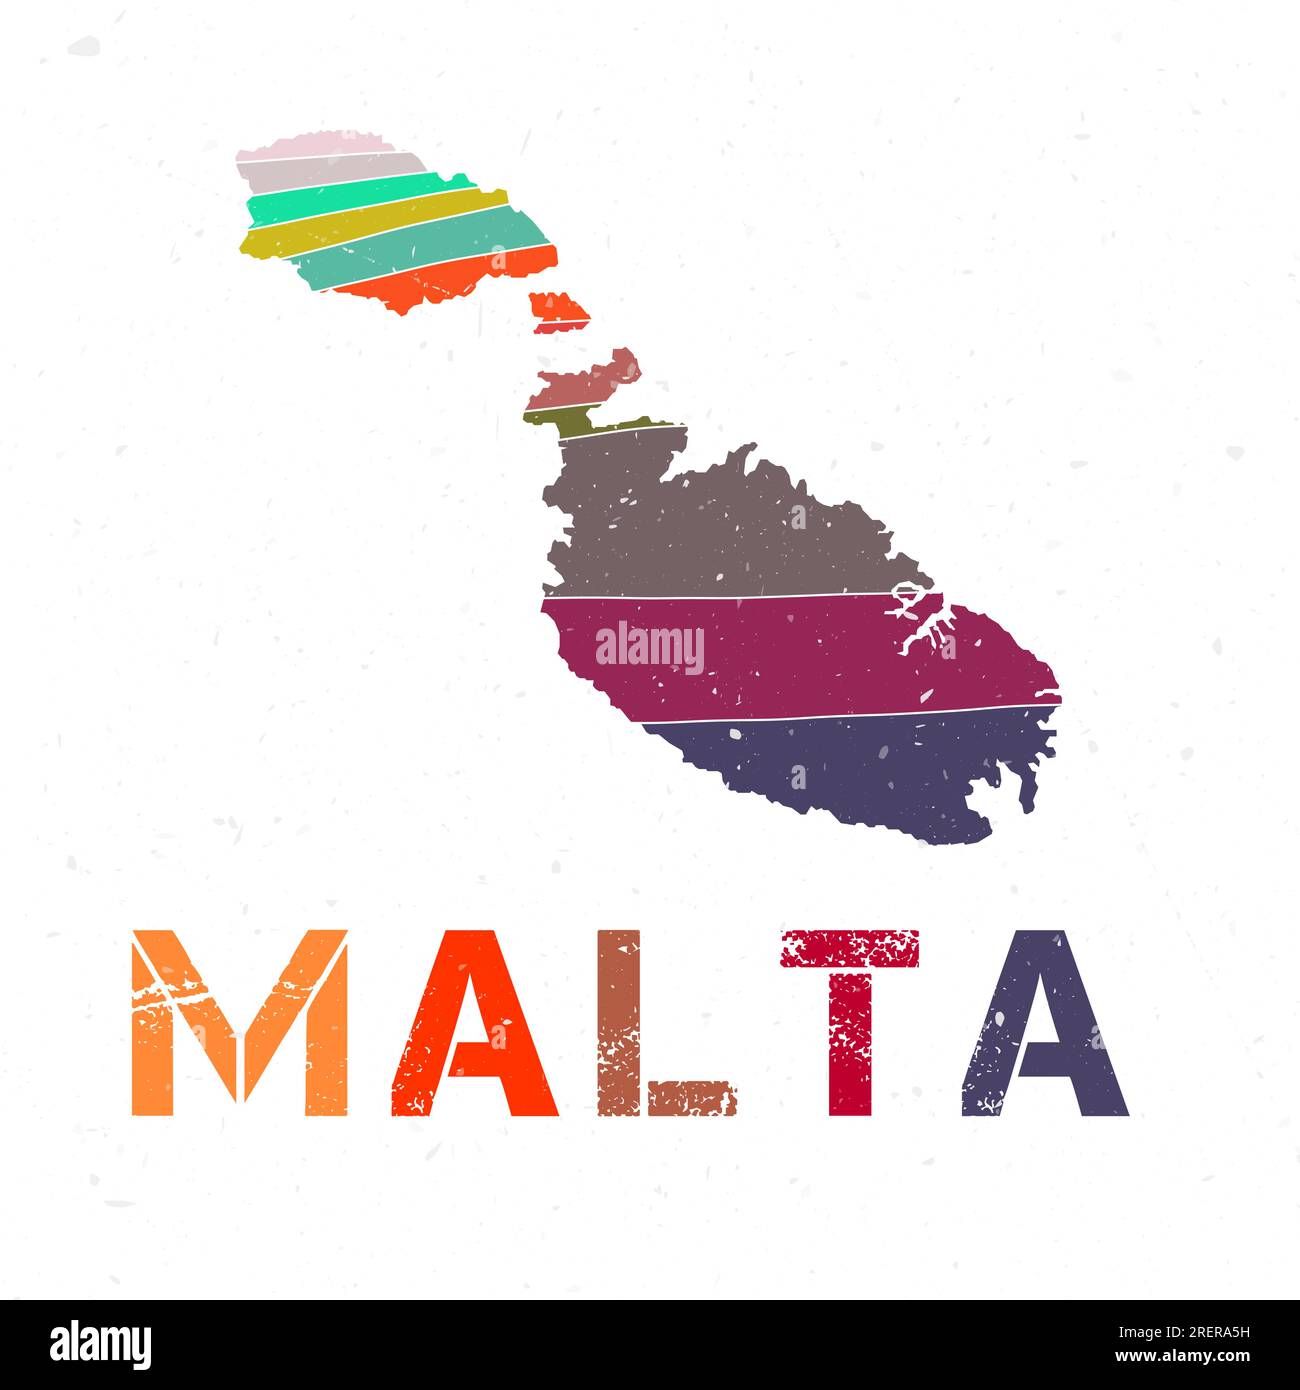 Malta map design. Shape of the island with beautiful geometric waves and grunge texture. Elegant vector illustration. Stock Vector